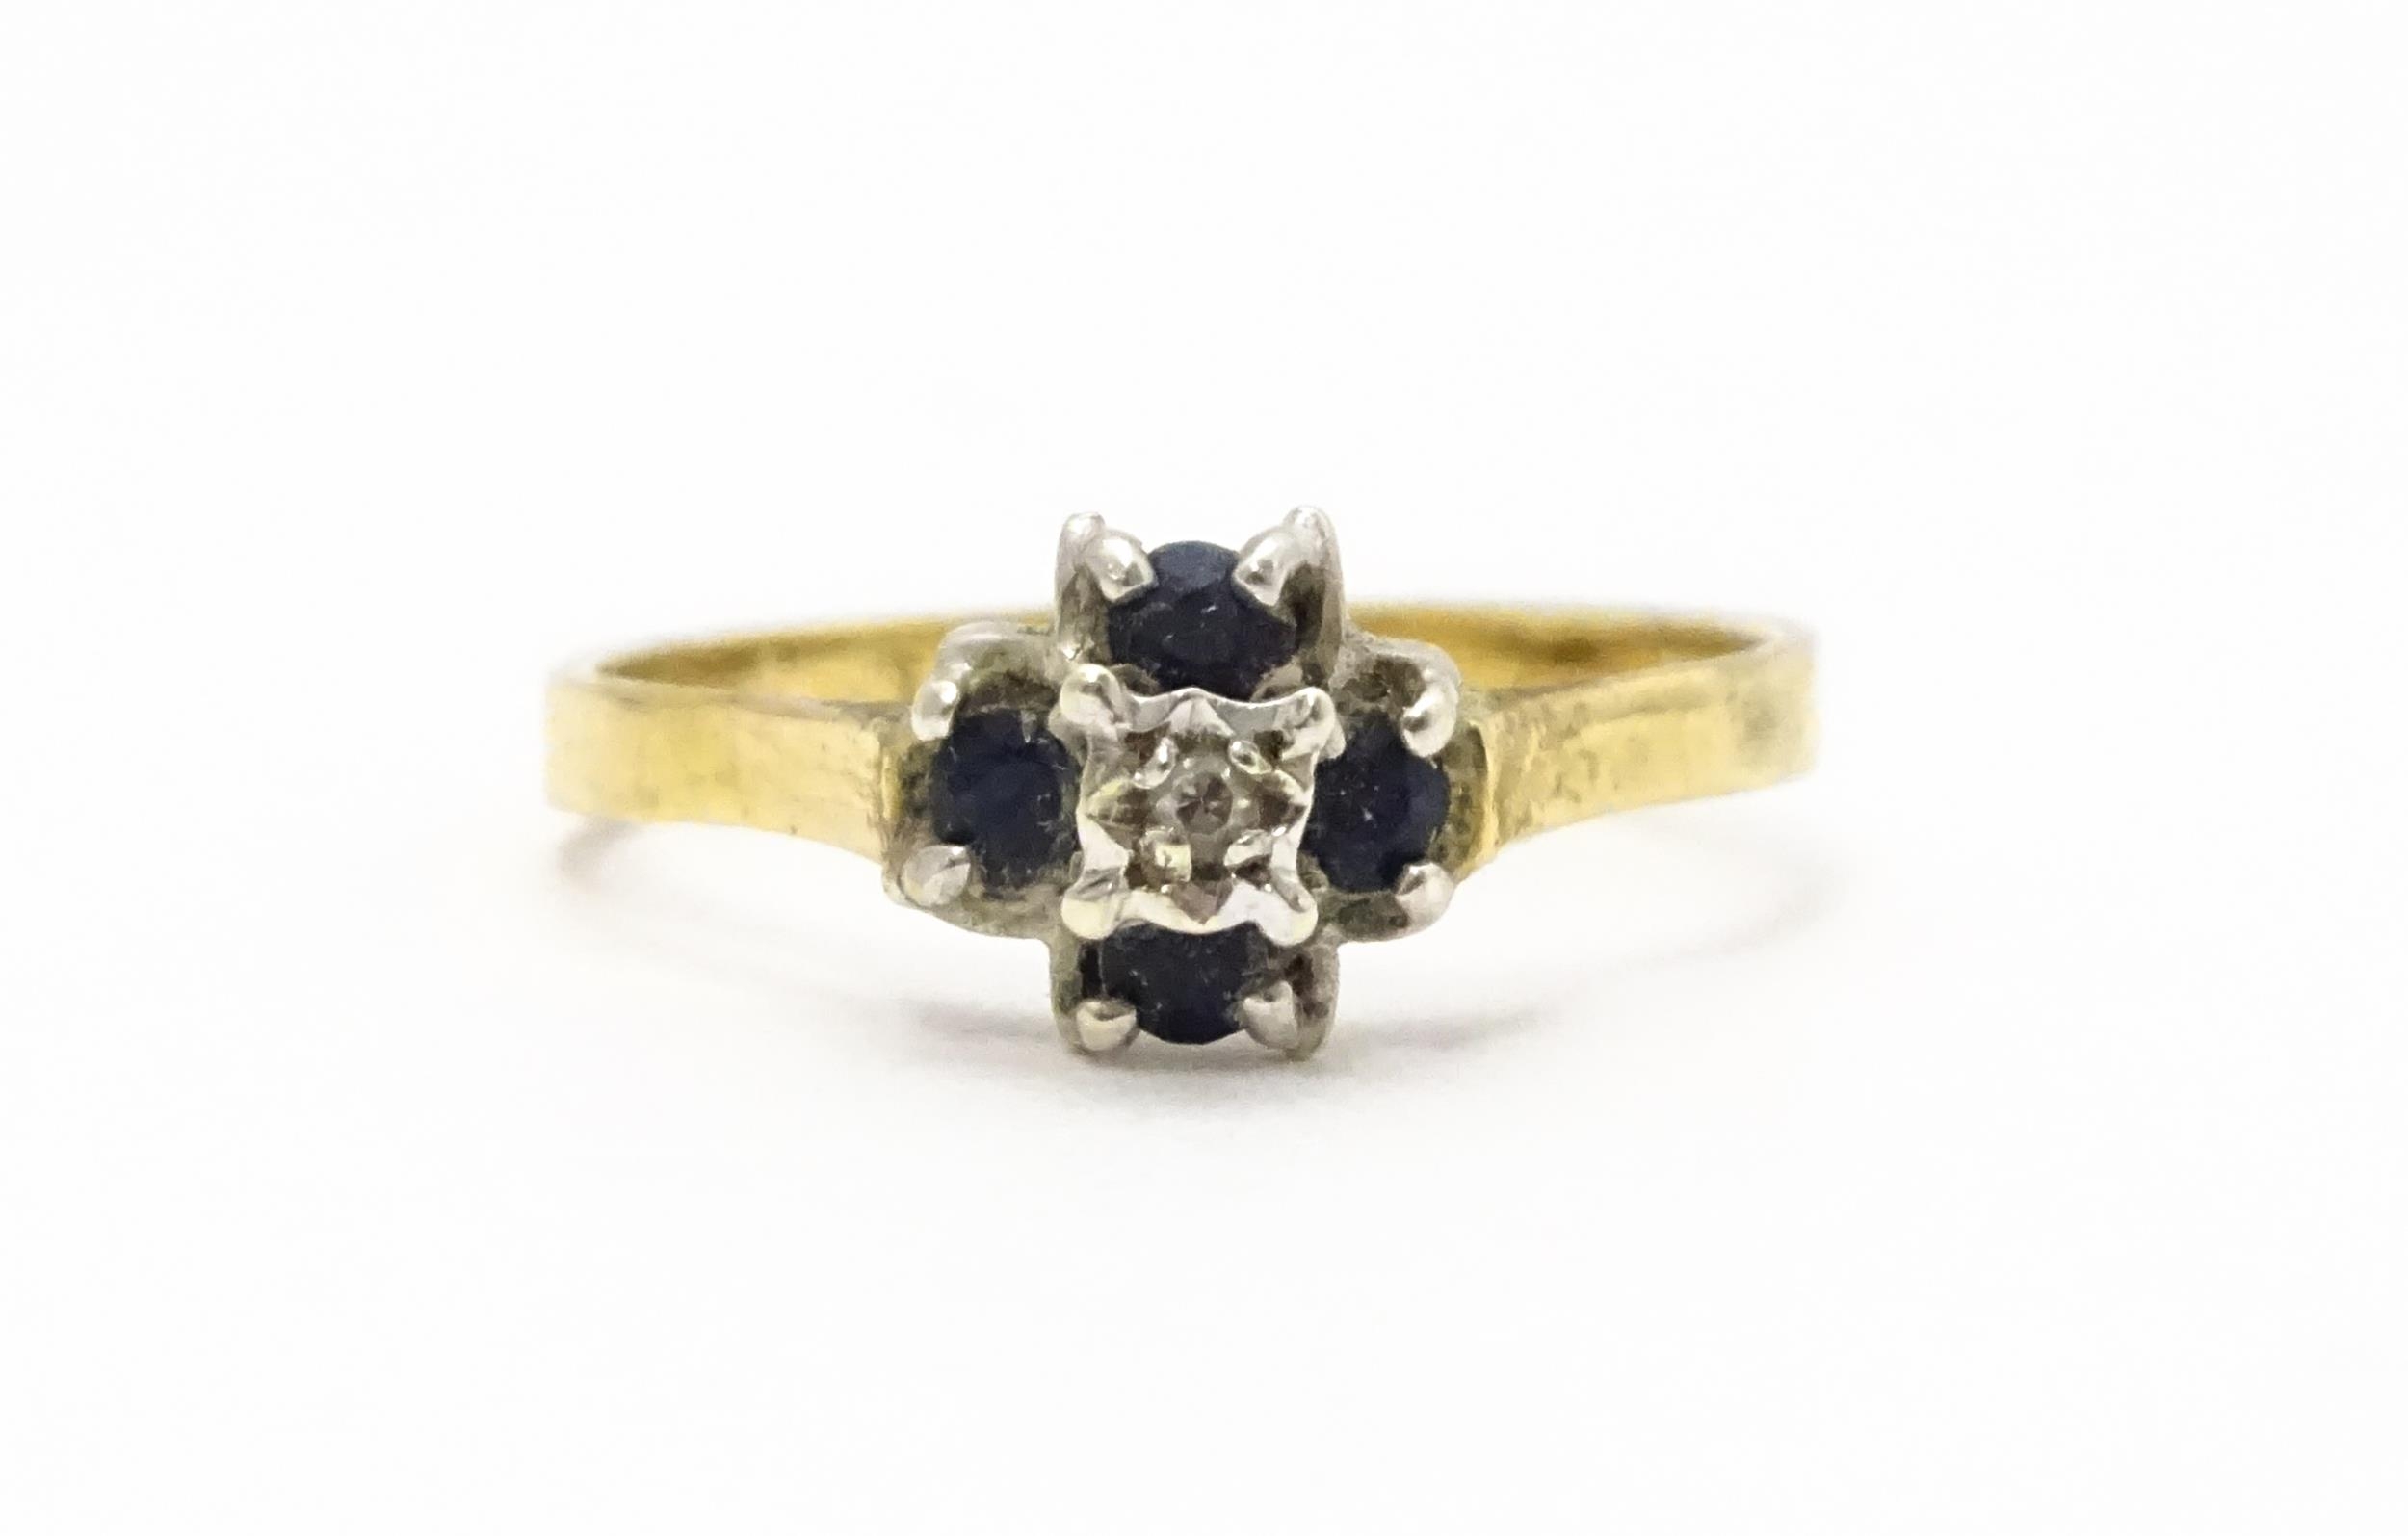 A 9ct gold ring set with diamonds and blue stones. Ring size approx. L Please Note - we do not